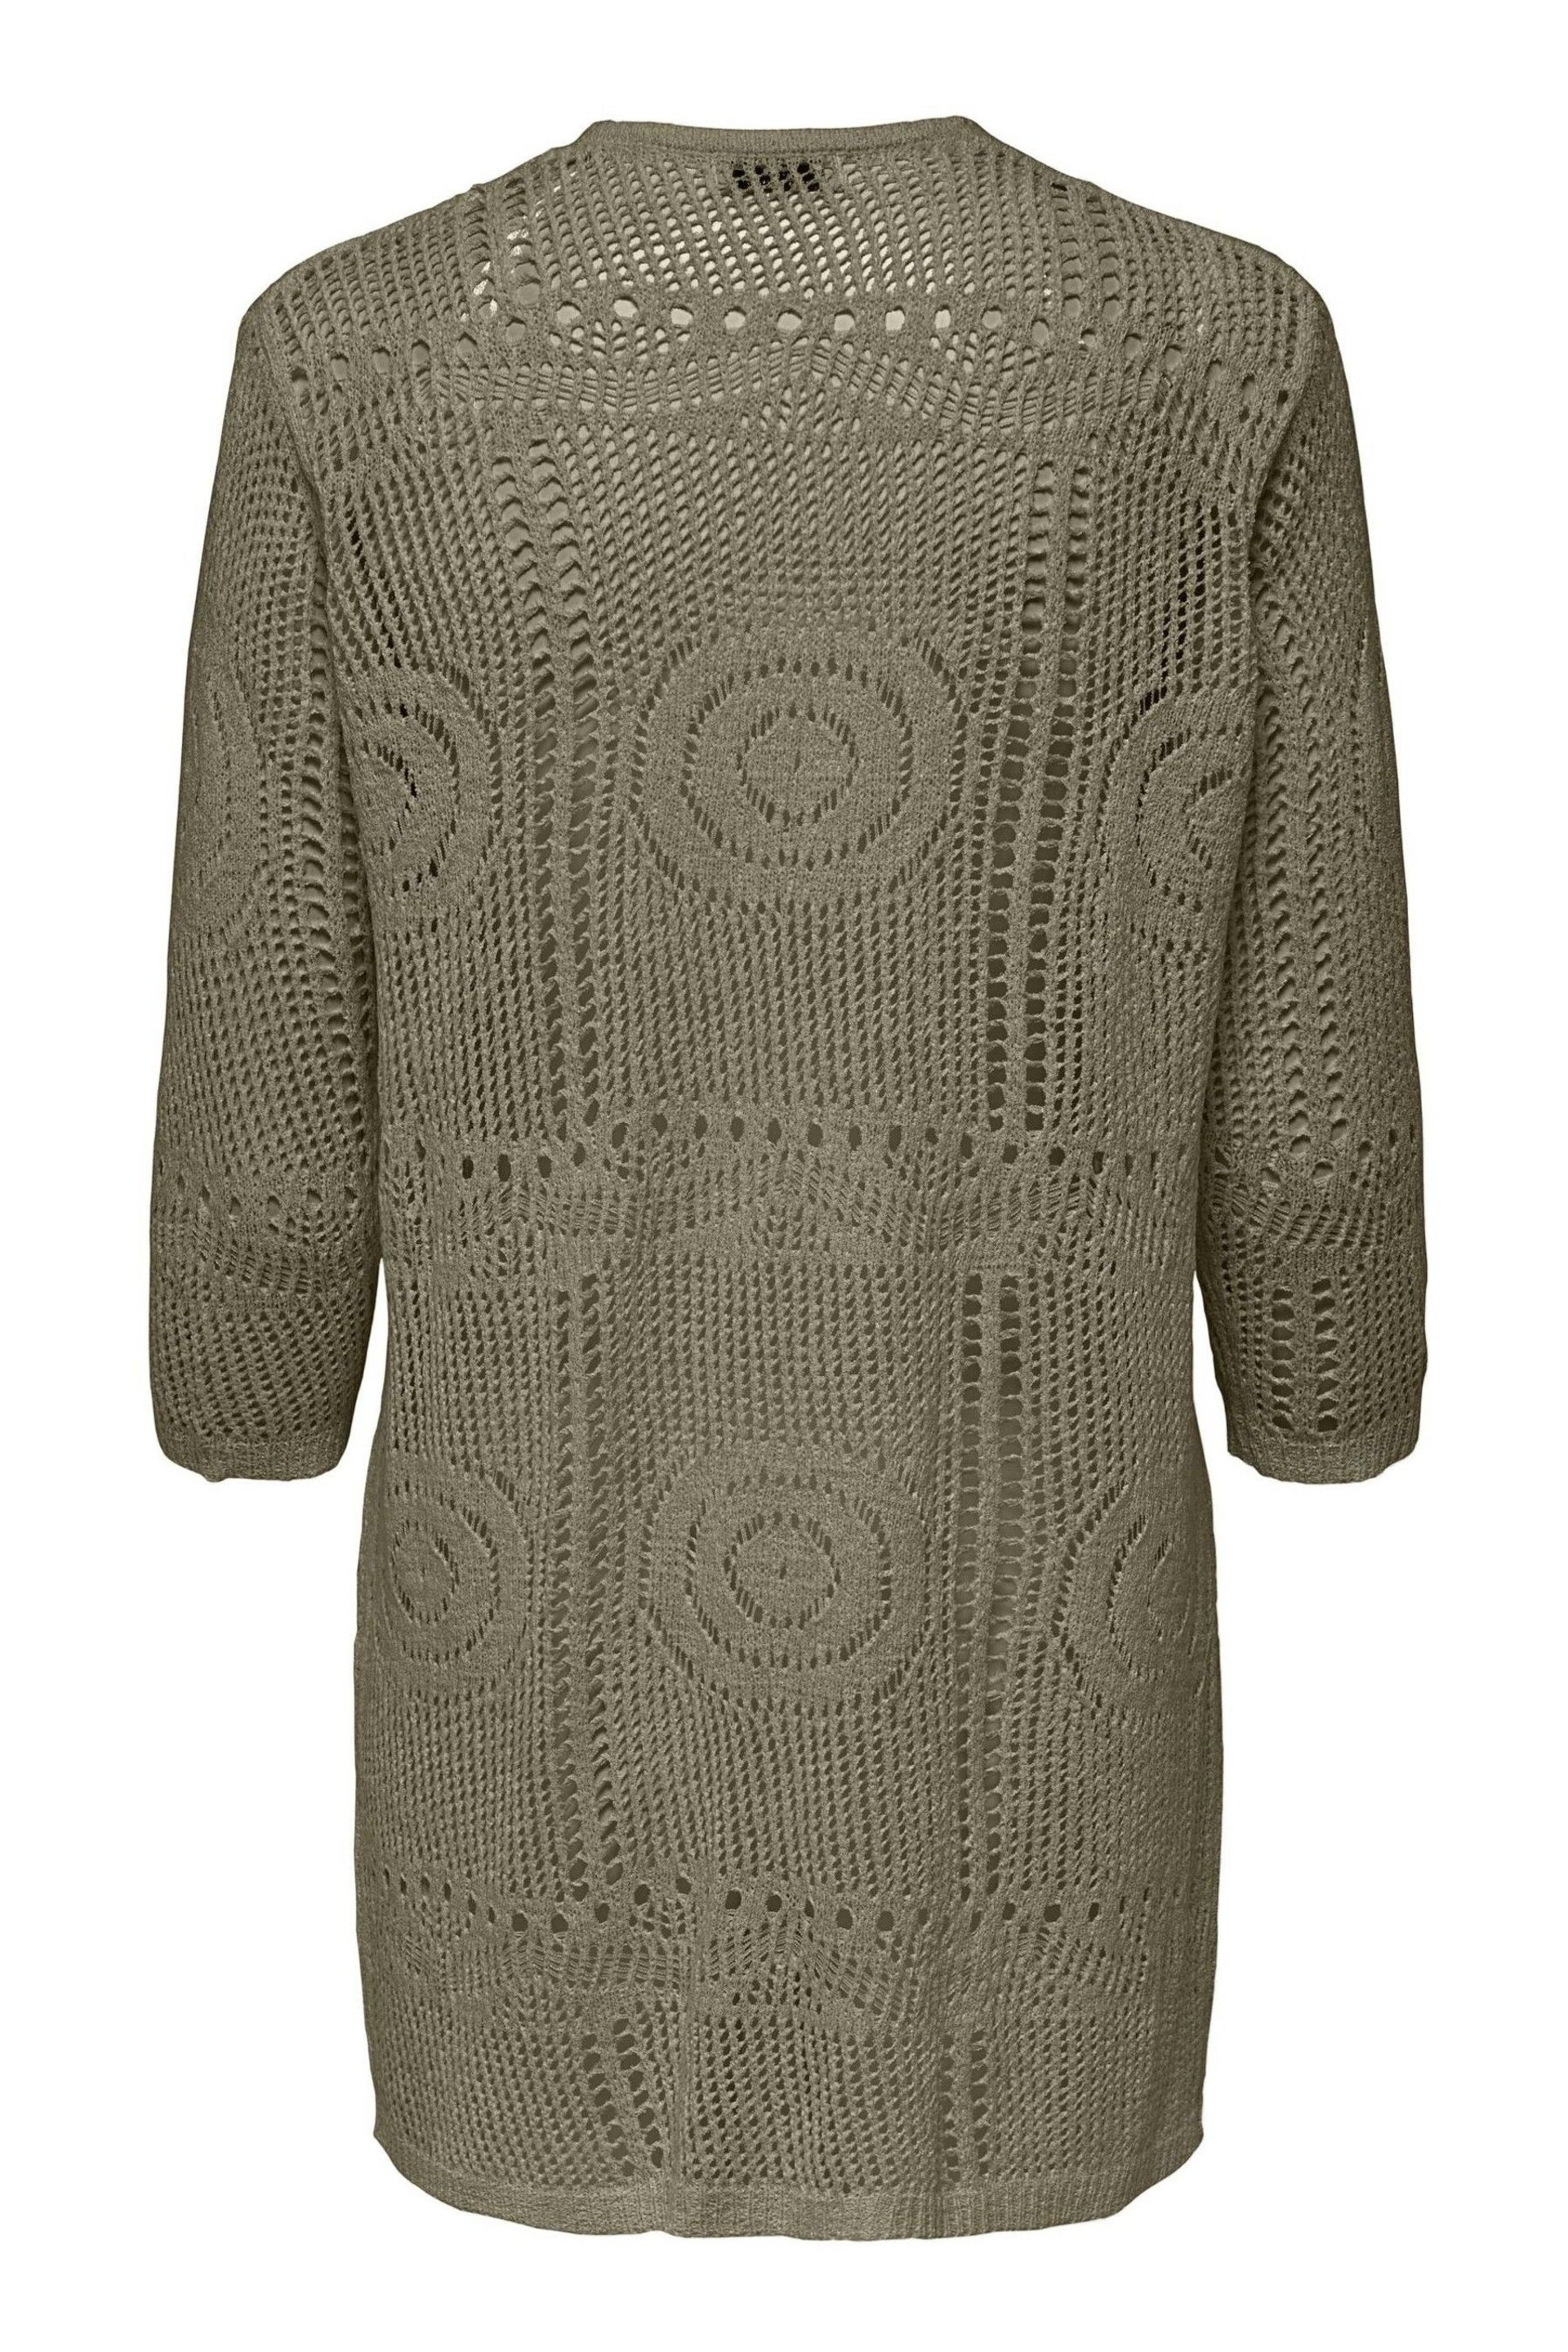 JDY Green Crcohet Relaxed Summer Cardigan - Image 3 of 4